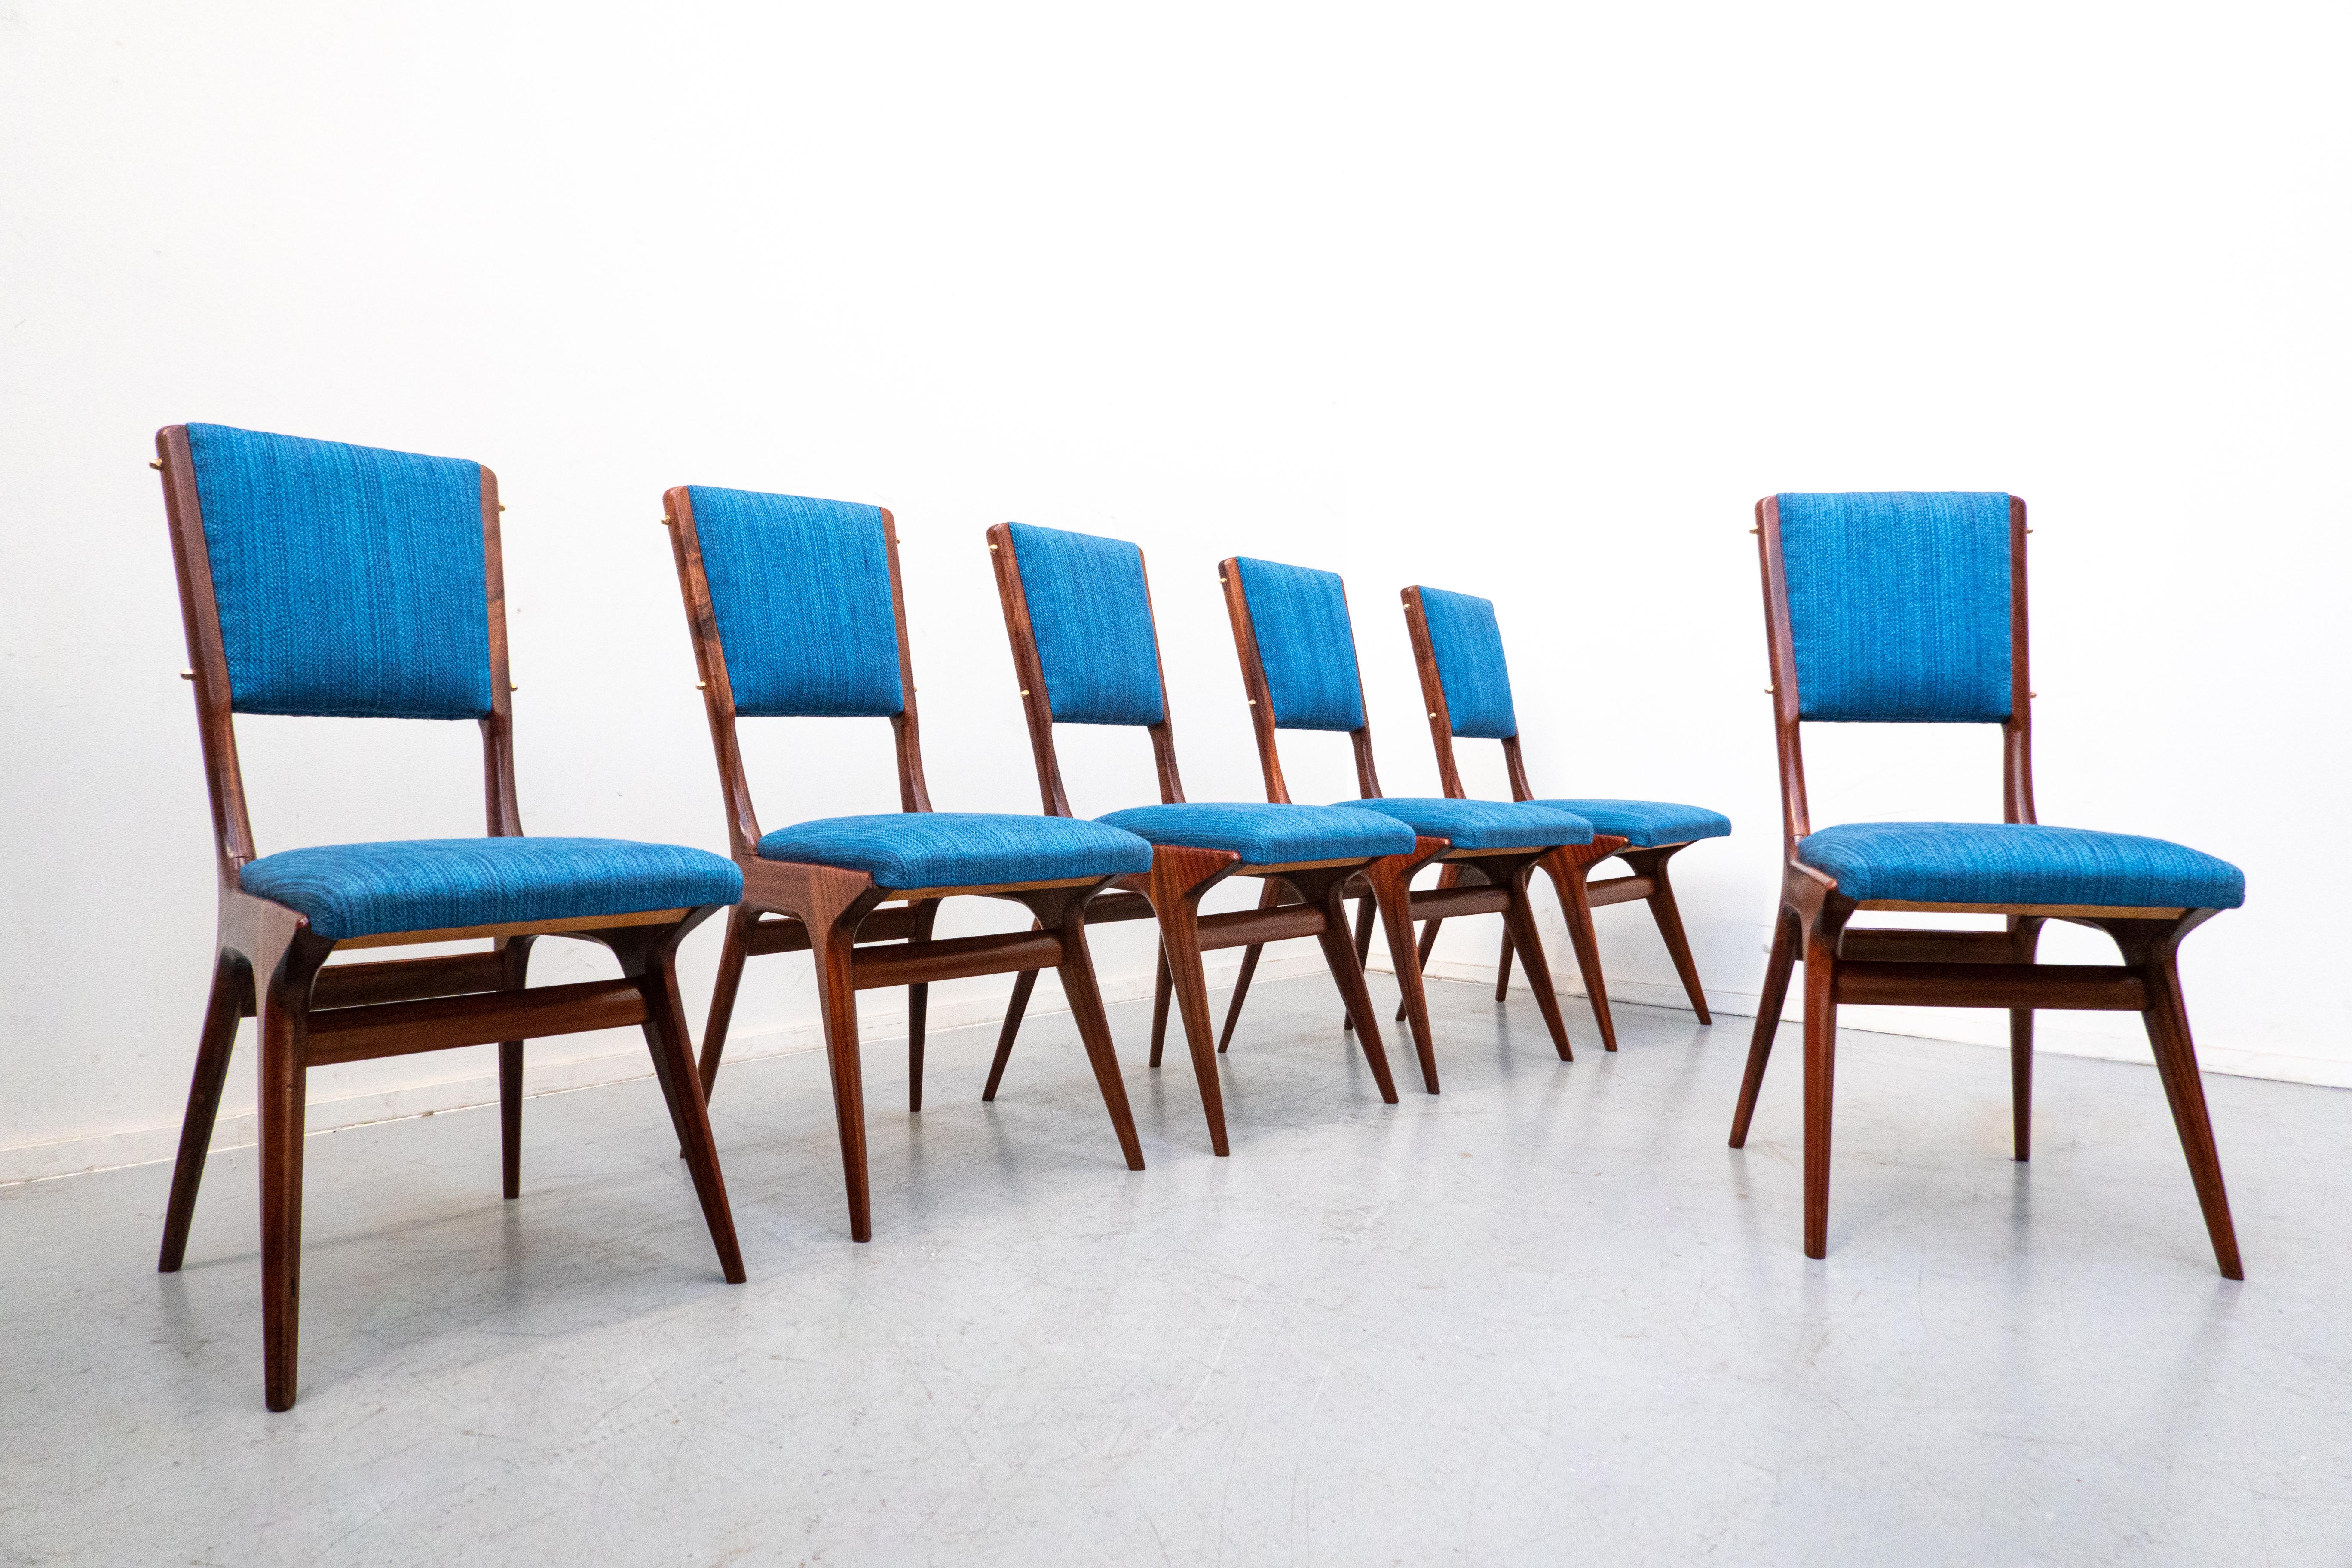 Set of 6 blue chairs model 634 by Carlo de Carli for Cassina, Italy, 1950s
Mahogany and blue fabric. 
Reupholstered.
 